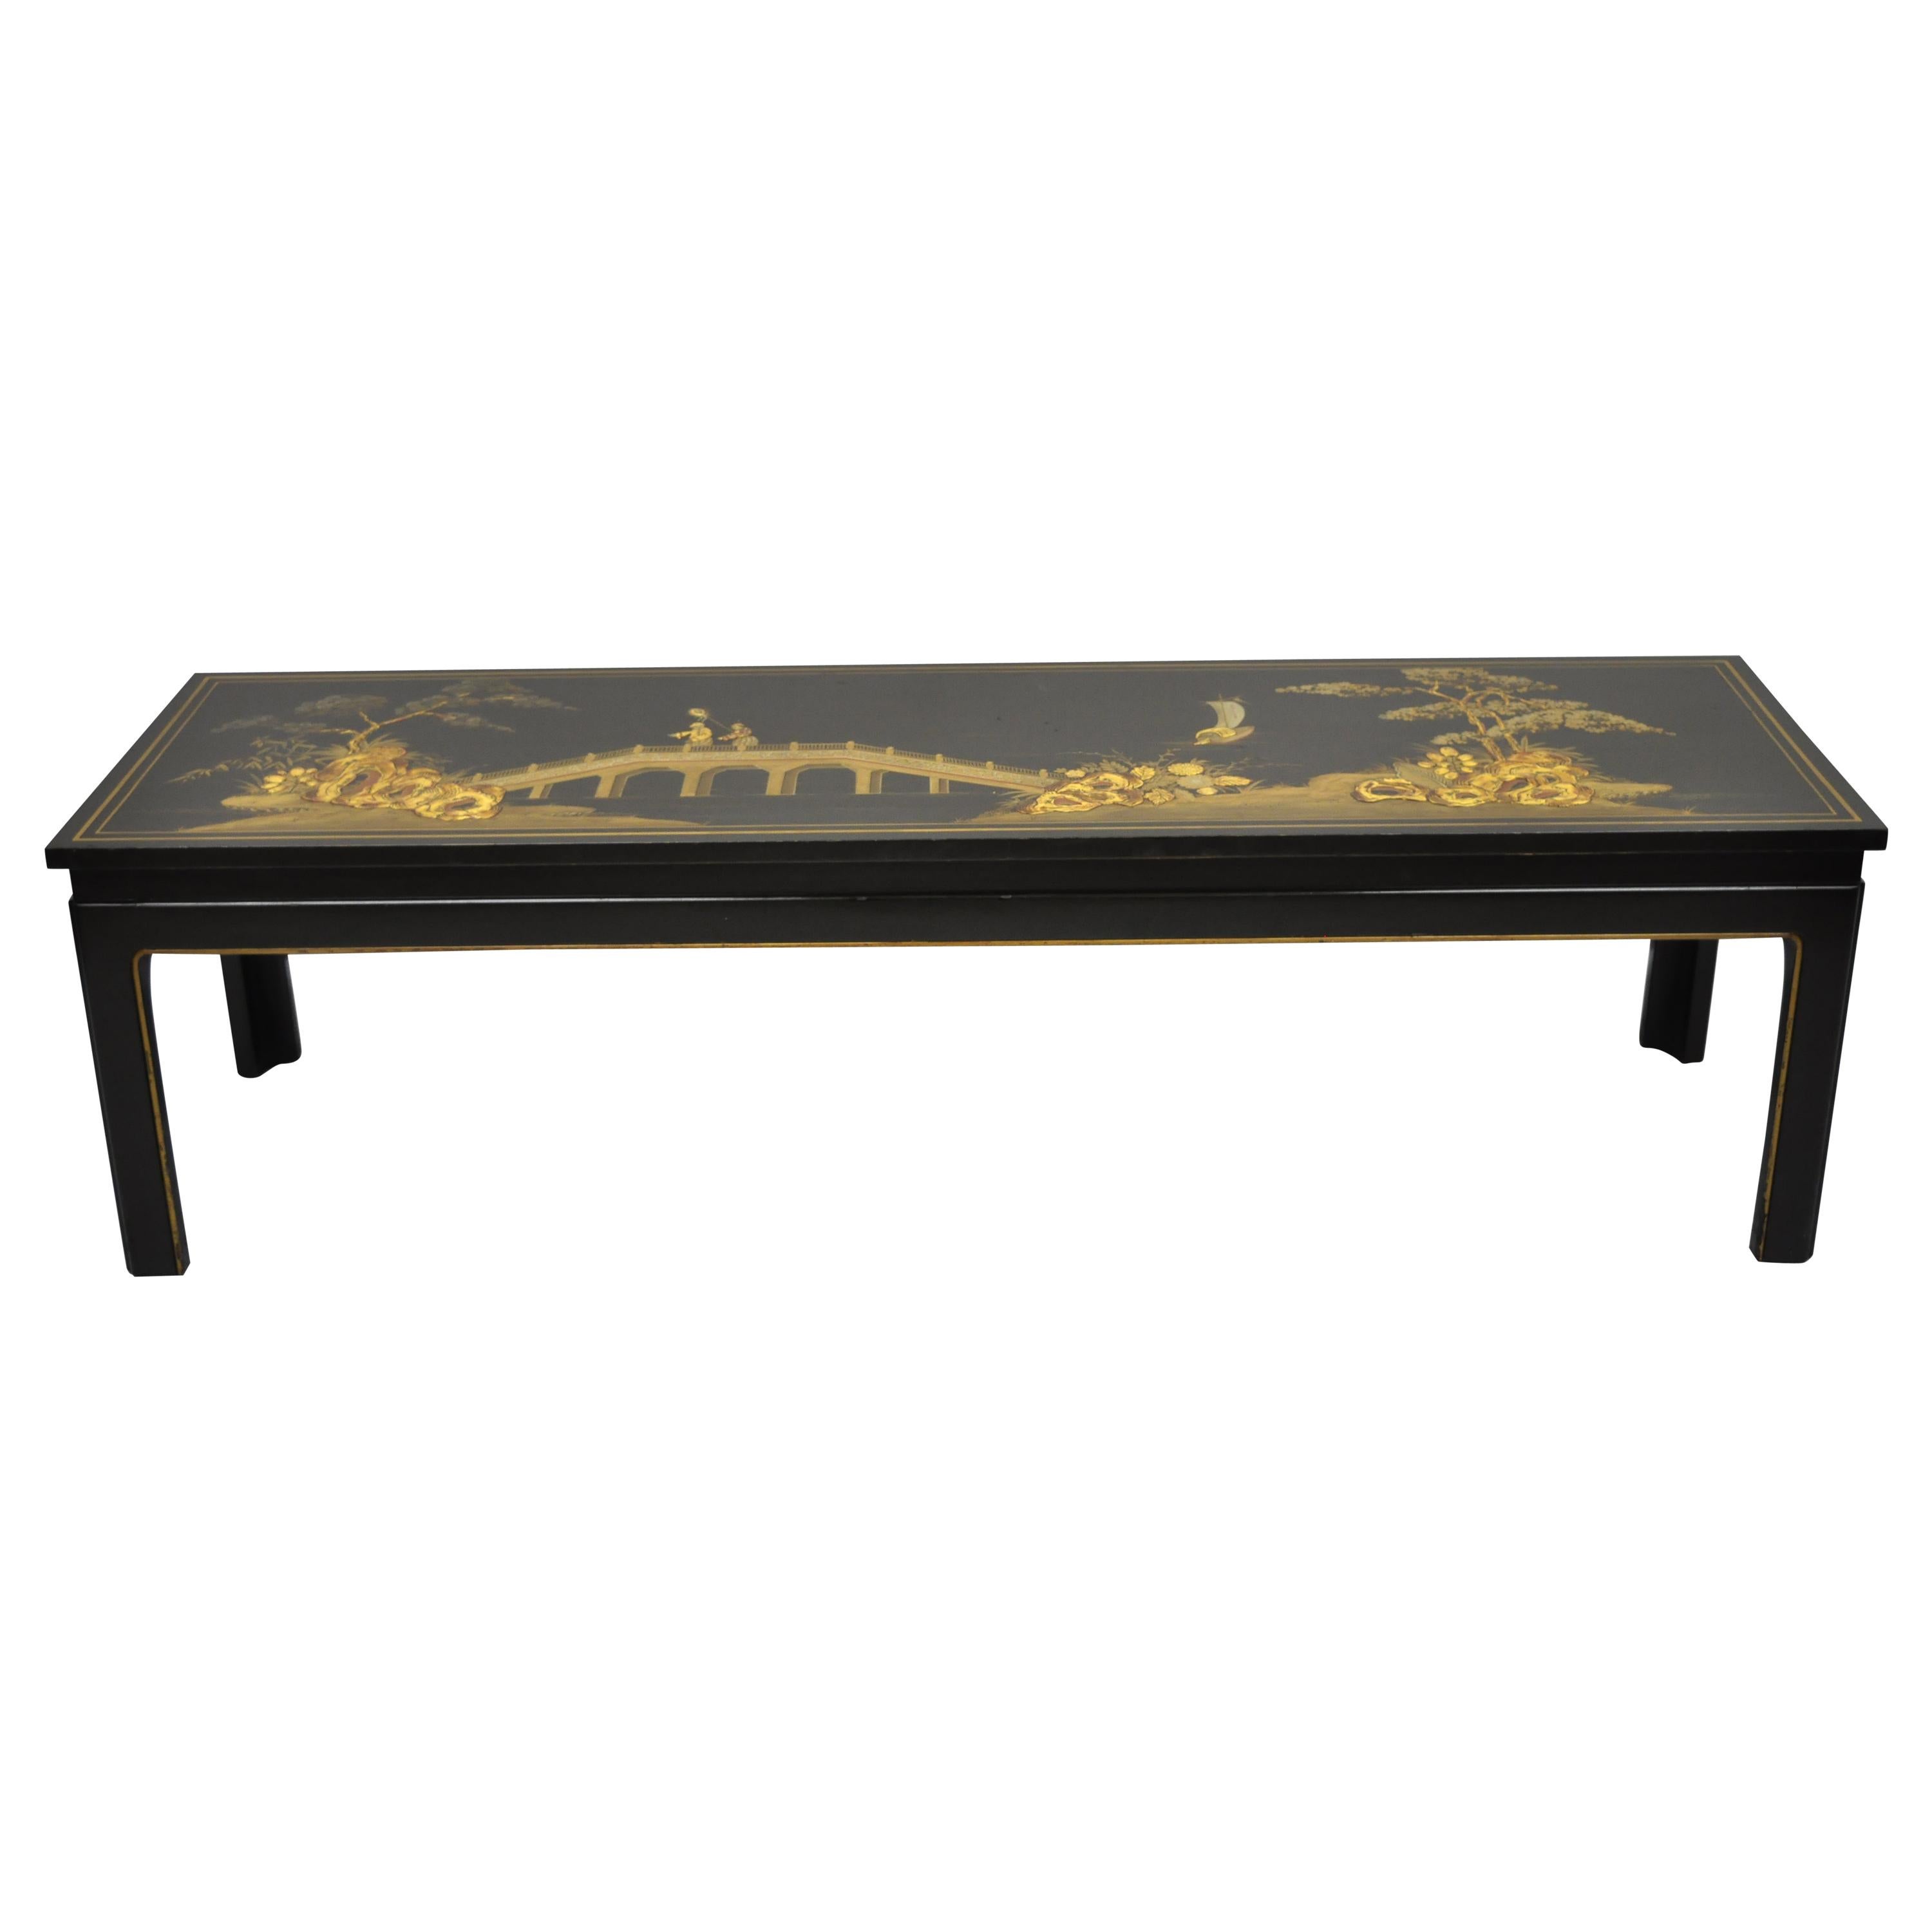 Beacon Hill Collection George III Chinoiserie Black Lacquer Painted Coffee Table